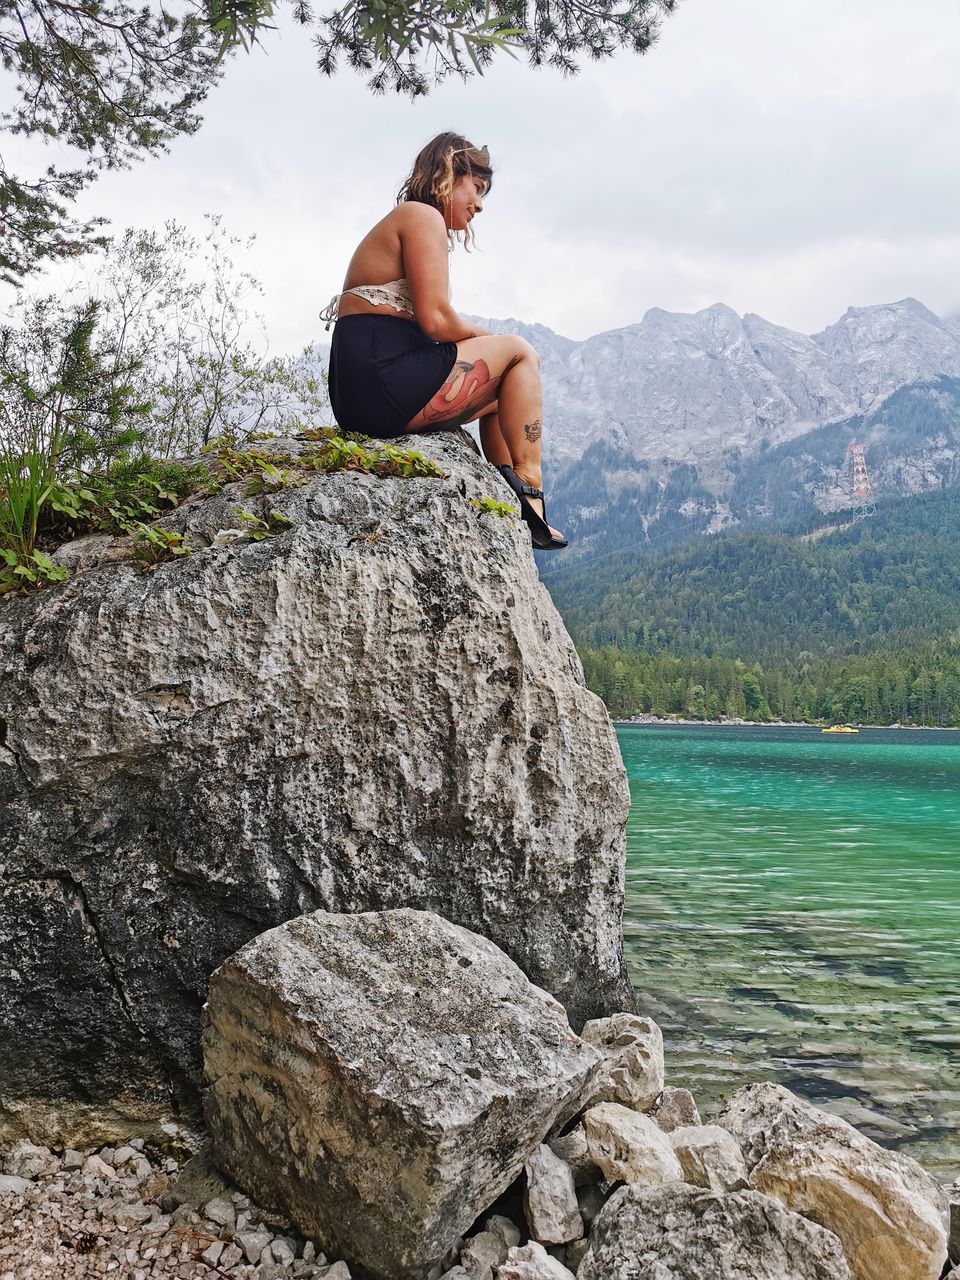 rock, mountain, one person, adult, leisure activity, nature, water, full length, beauty in nature, scenics - nature, adventure, activity, mountain range, vacation, holiday, trip, lifestyles, men, day, sky, travel, sports, land, sitting, tranquility, environment, side view, relaxation, outdoors, tree, climbing, plant, rock formation, landscape, lake, tranquil scene, mature adult, casual clothing, young adult, cloud, hiking, exercising, travel destinations, recreation, vitality, idyllic, rock climbing, cliff, looking, non-urban scene